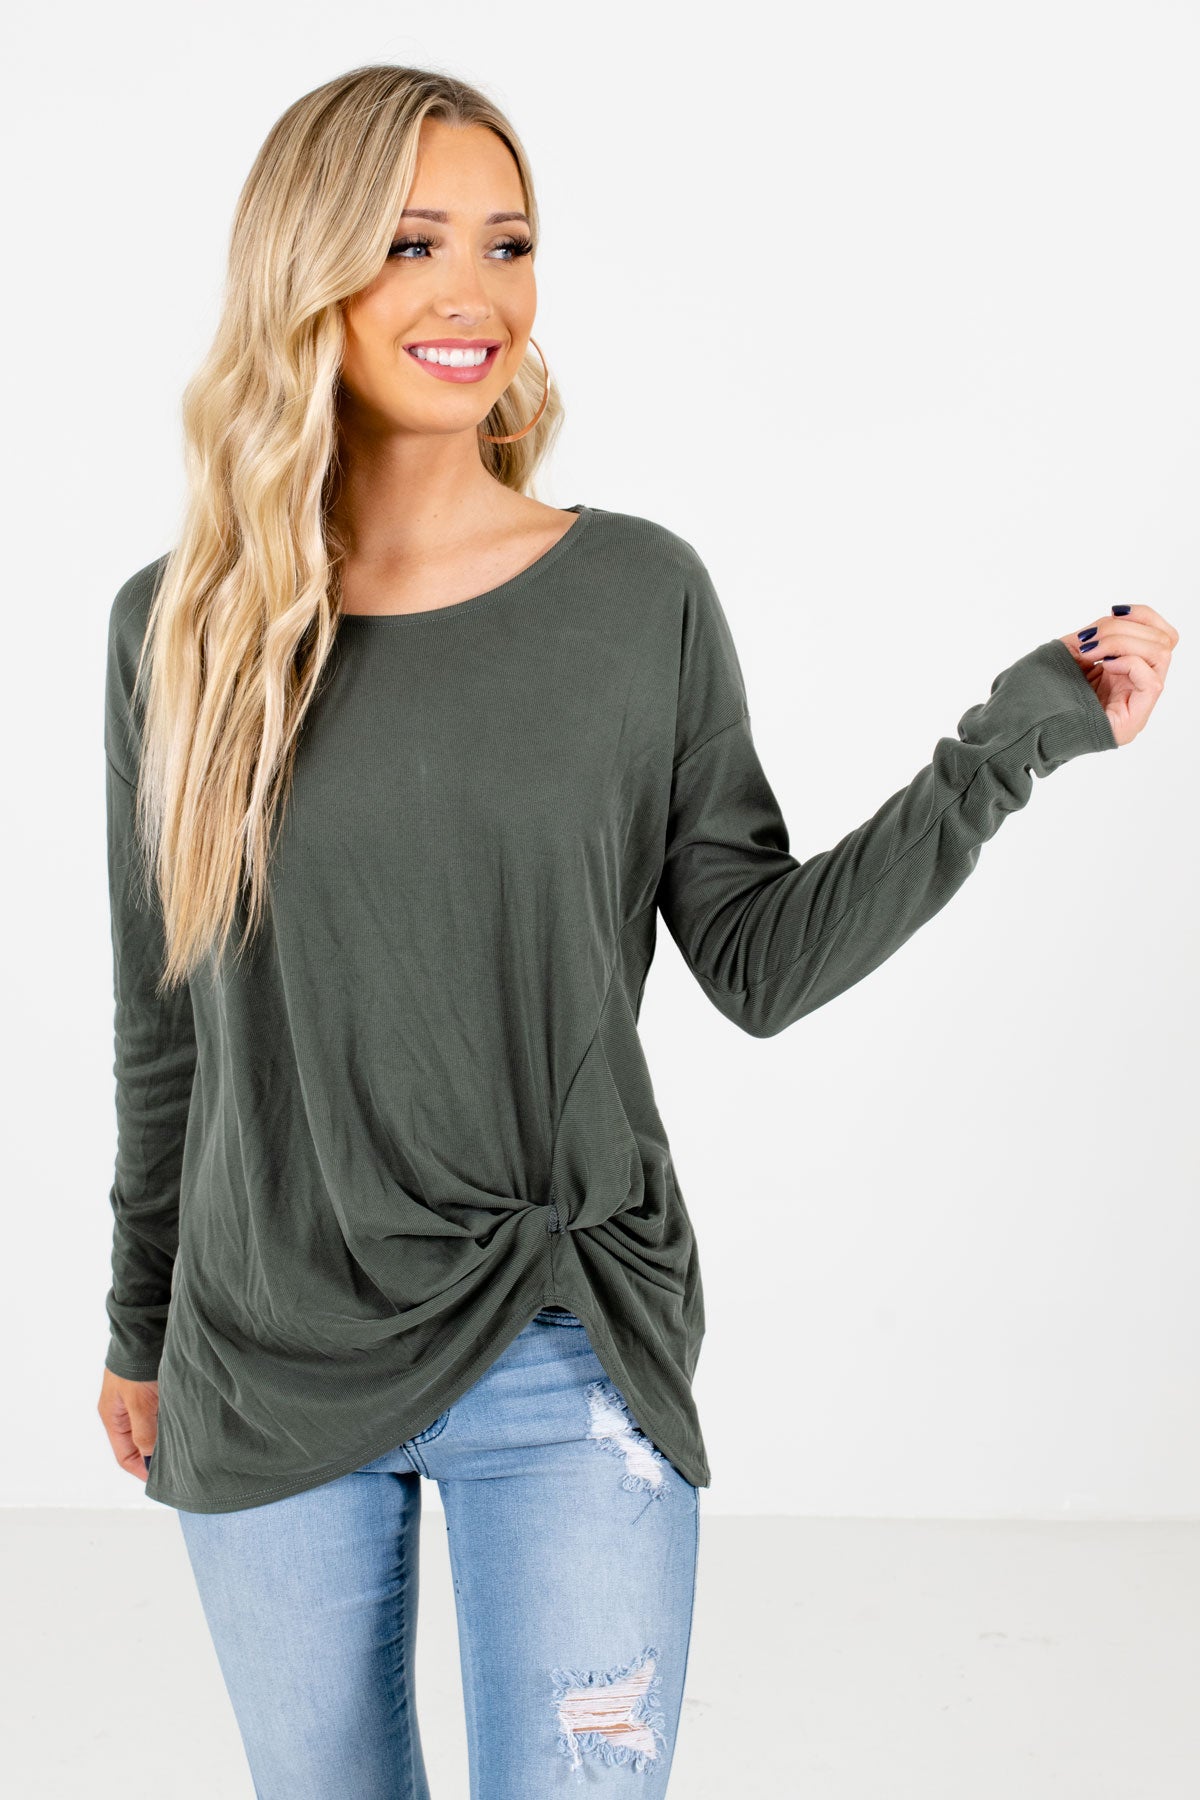 Women’s Green Warm and Cozy Boutique Tops